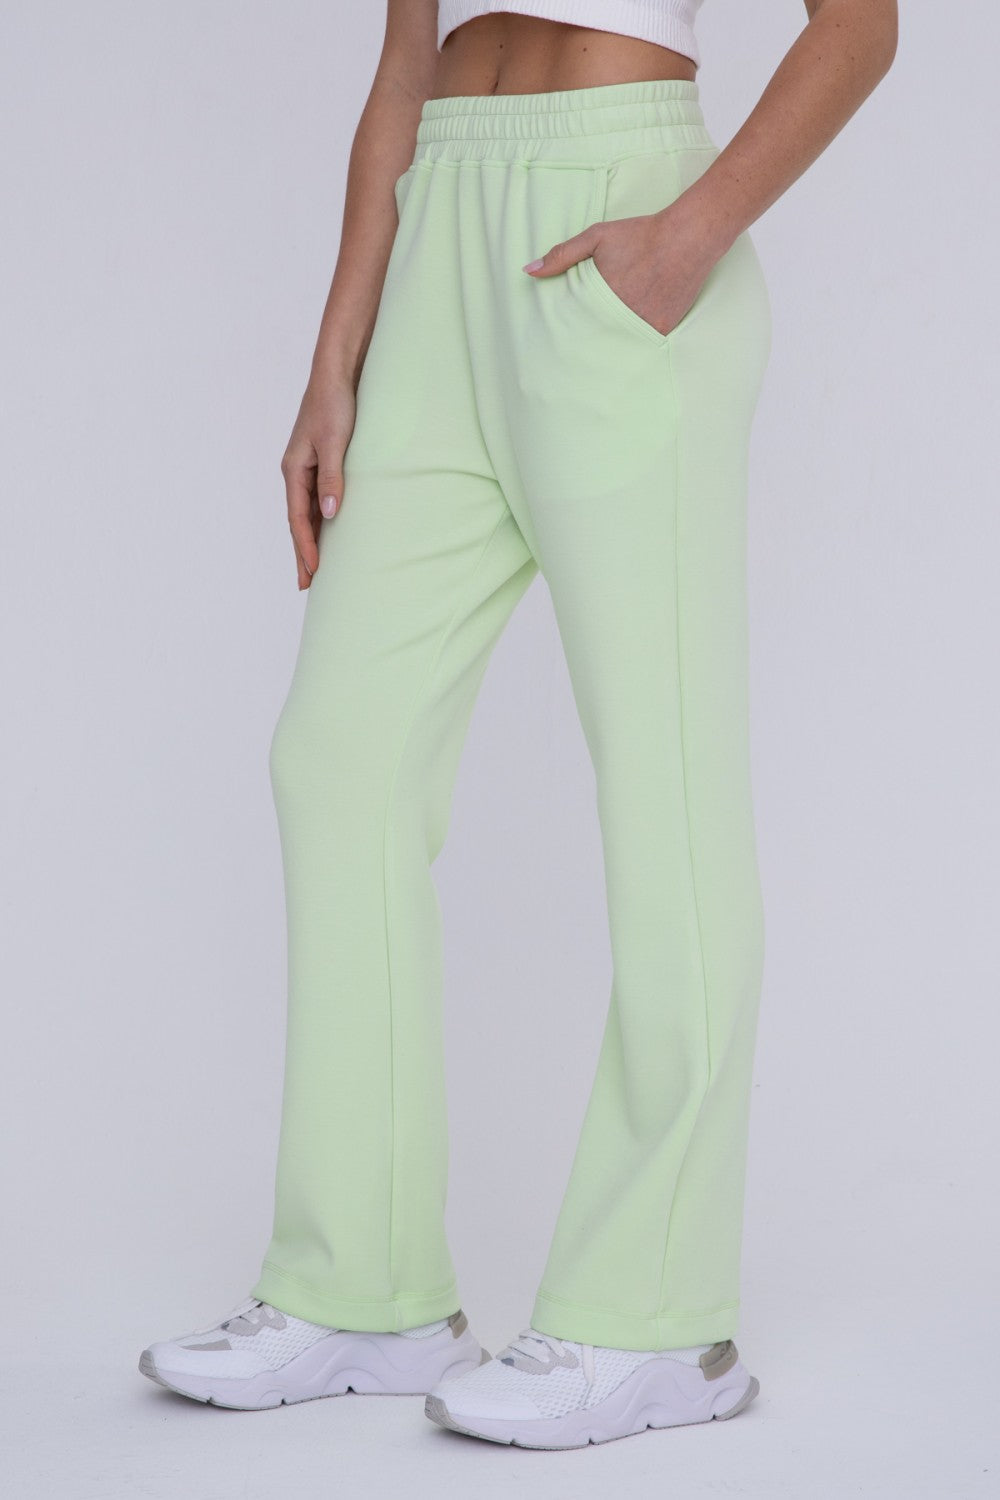 LIME PANT TYPE JOGGERS